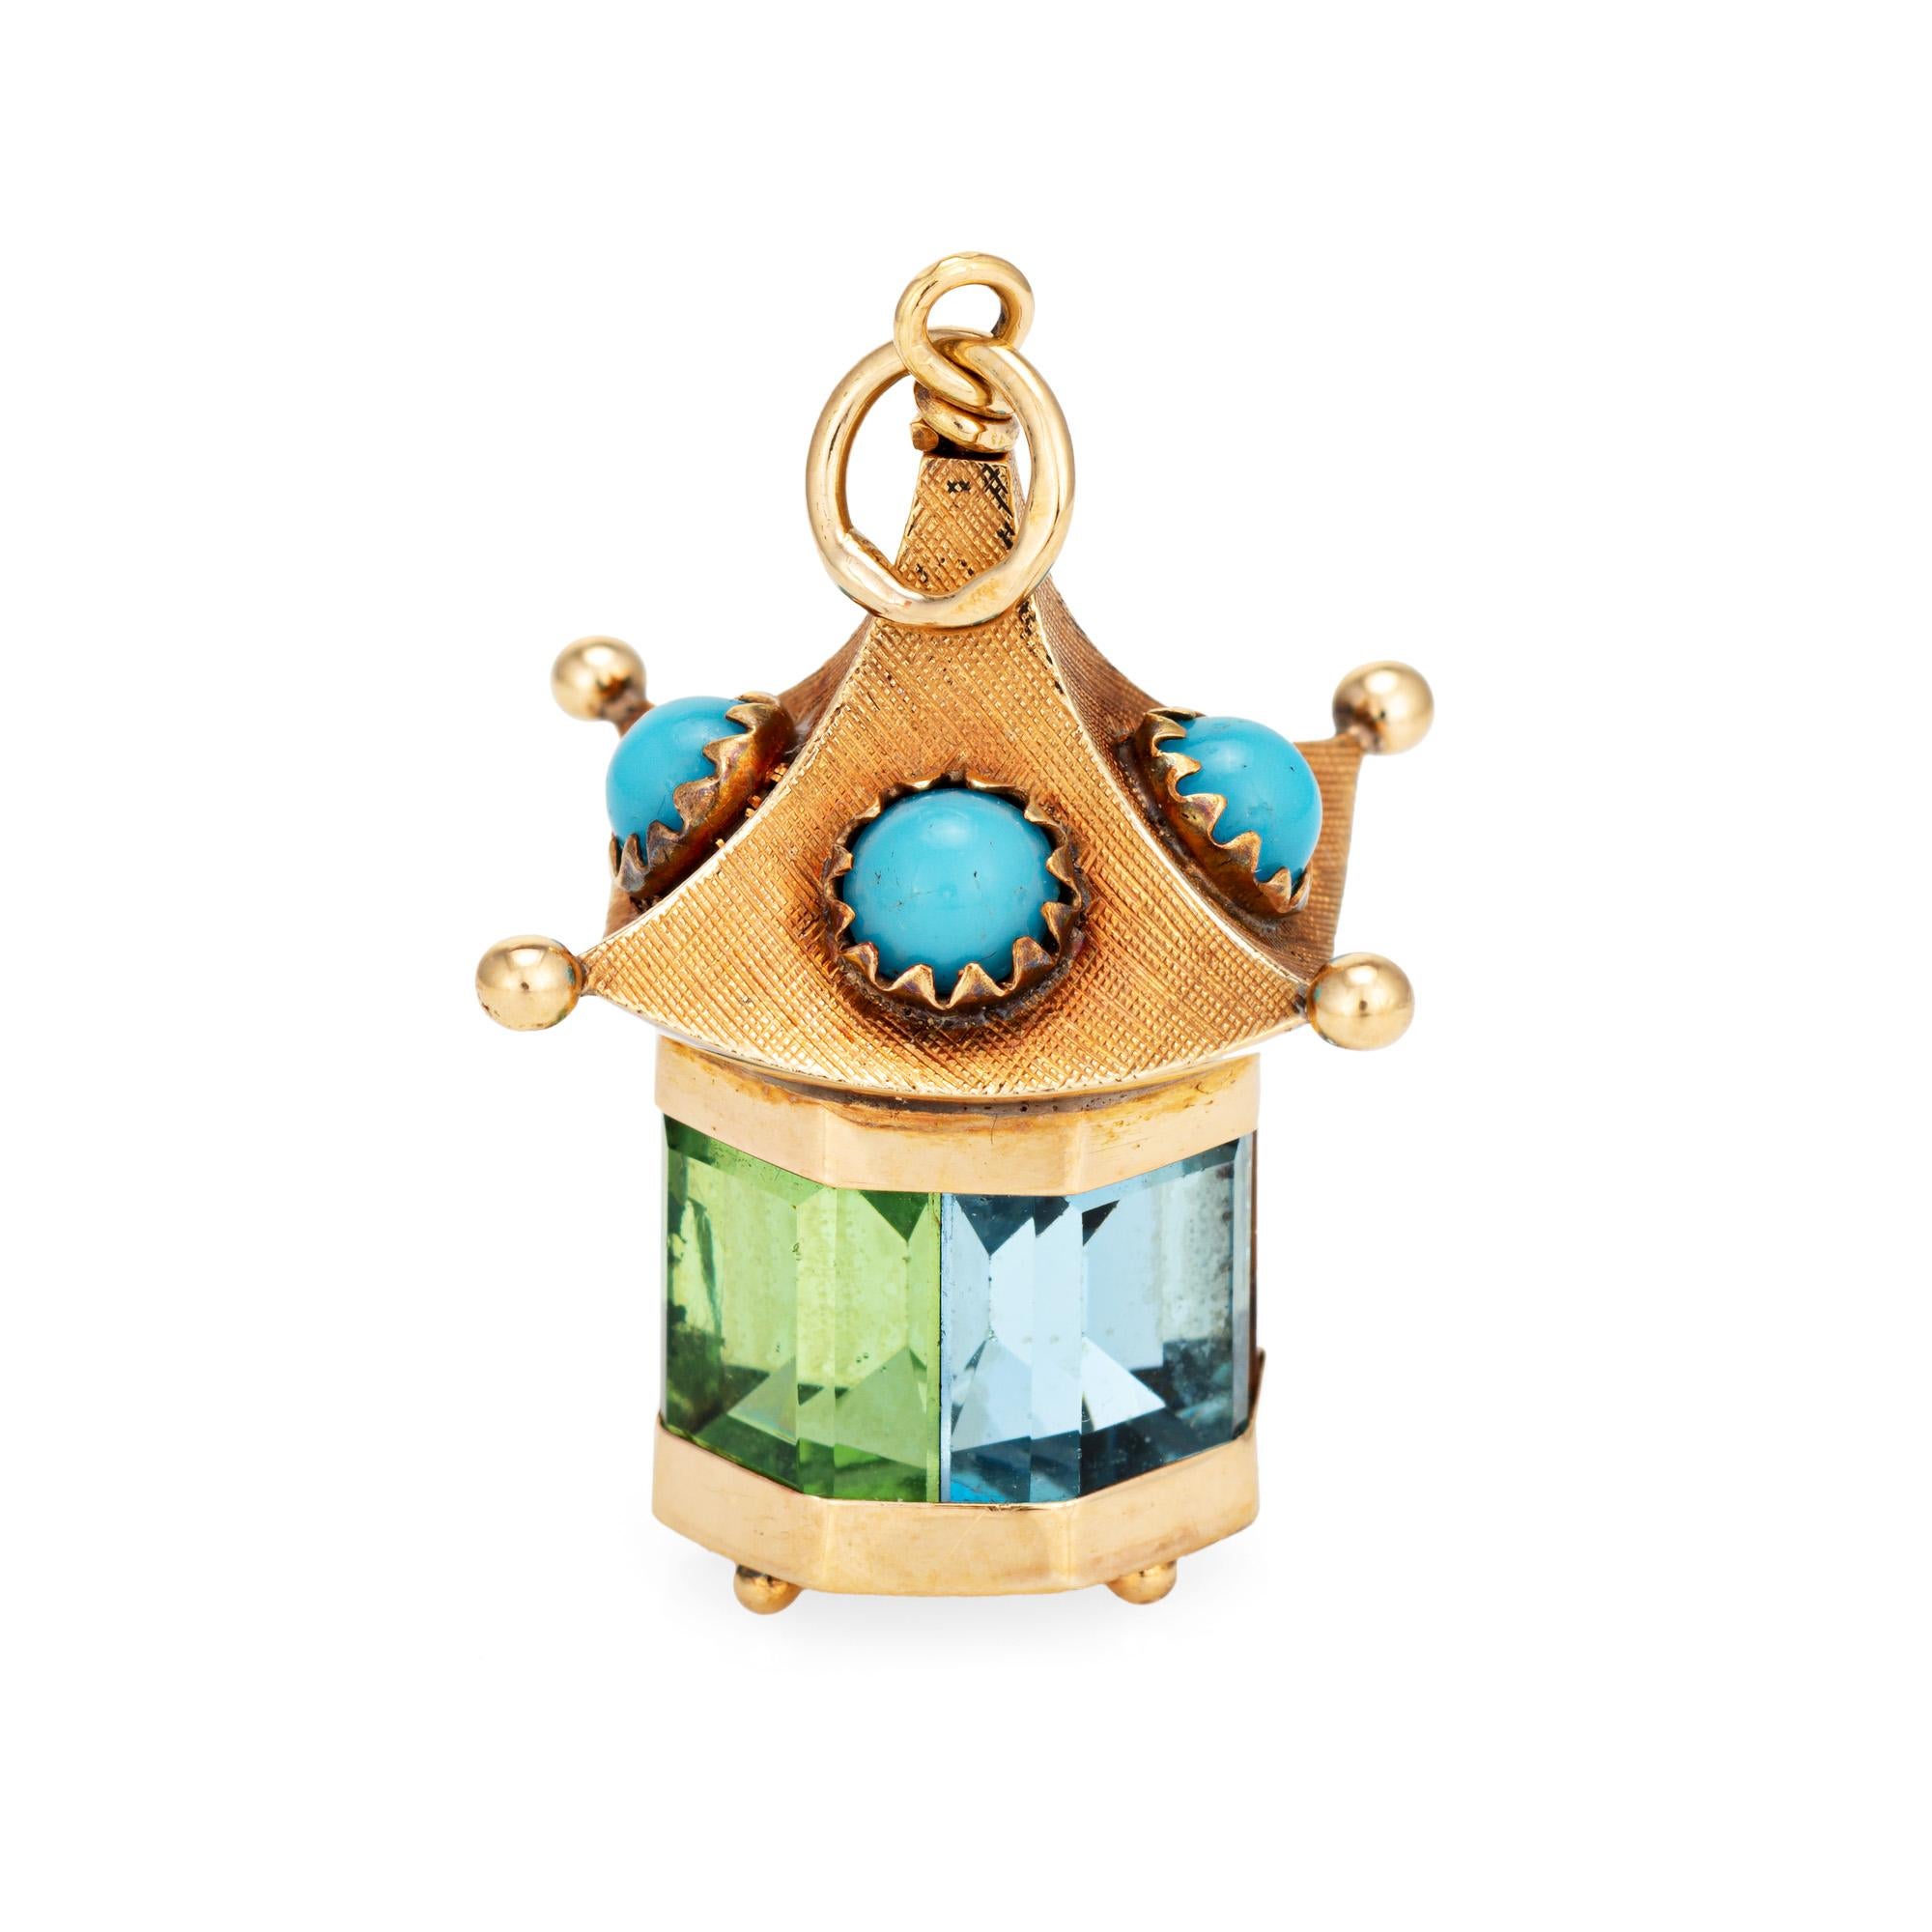 Finely detailed vintage temple charm crafted in 14k yellow gold (circa 1960s to 1970s).  

Cabochon cut turquoise measures 4mm diameter. Blue topaz, peridot, amethyst & citrine measures 10mm x 7mm (in very good condition and free of cracks or